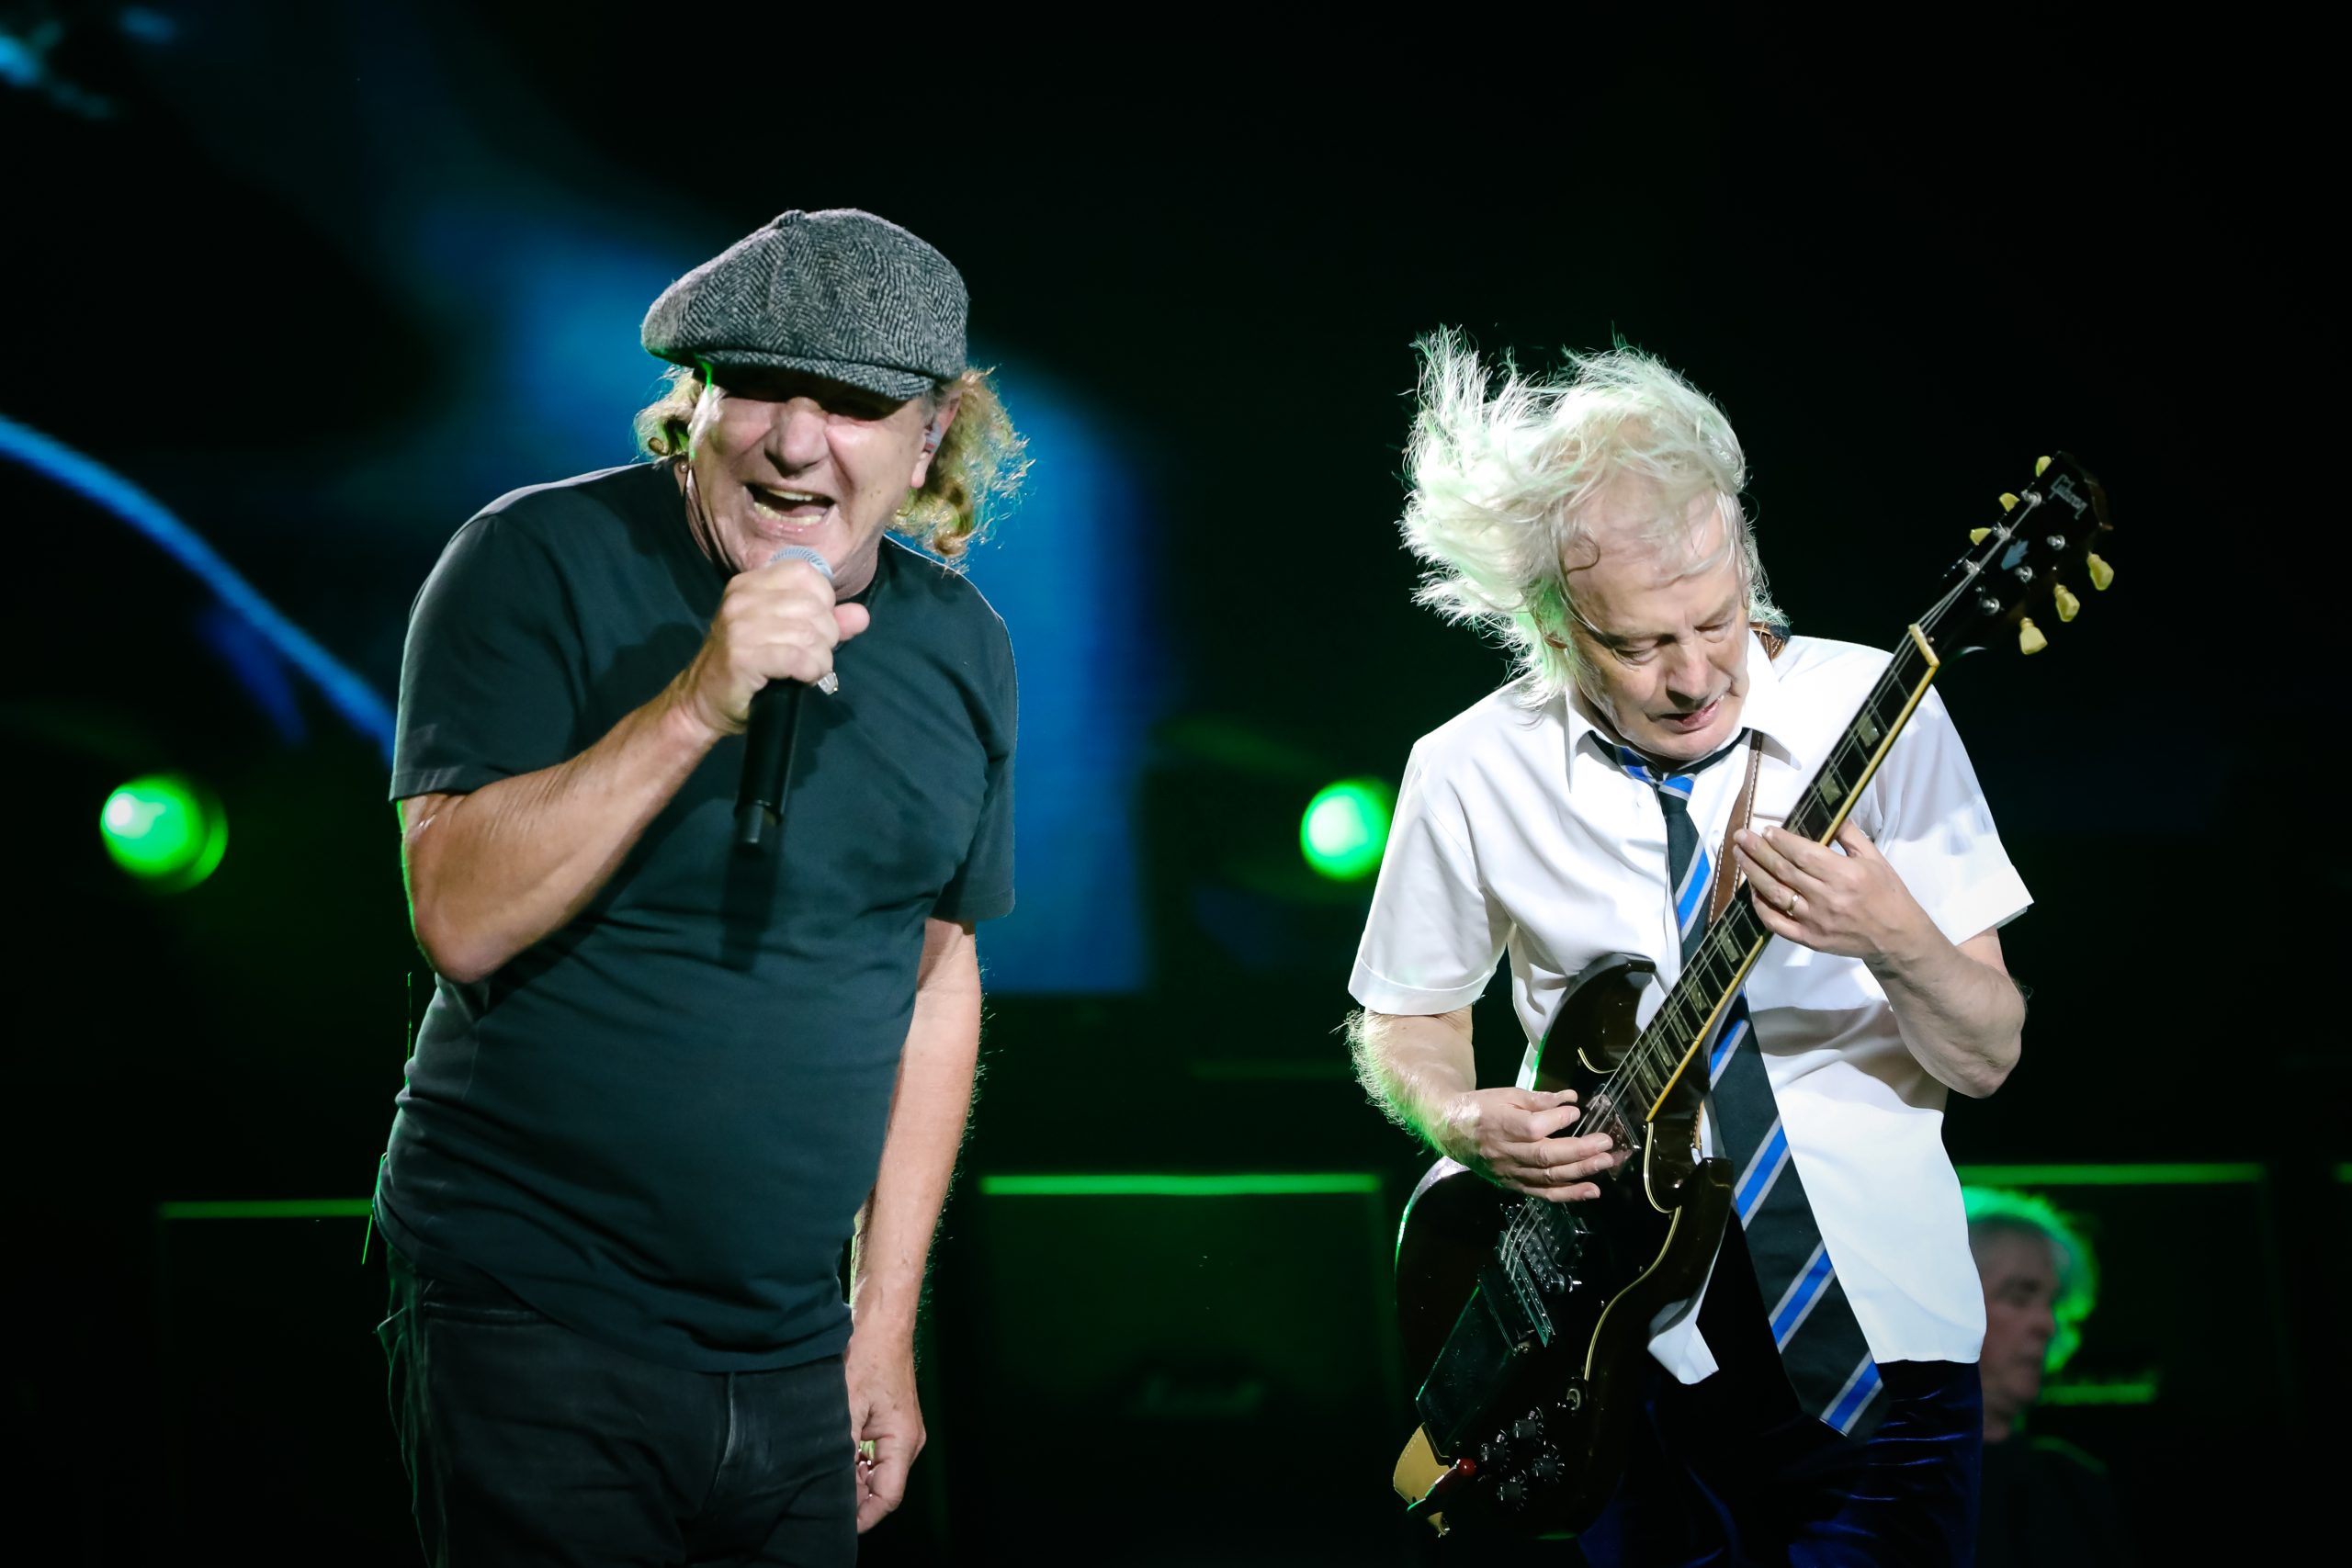 Power Up at Wembley: Experience AC/DC in Style with ATM Hospitality!